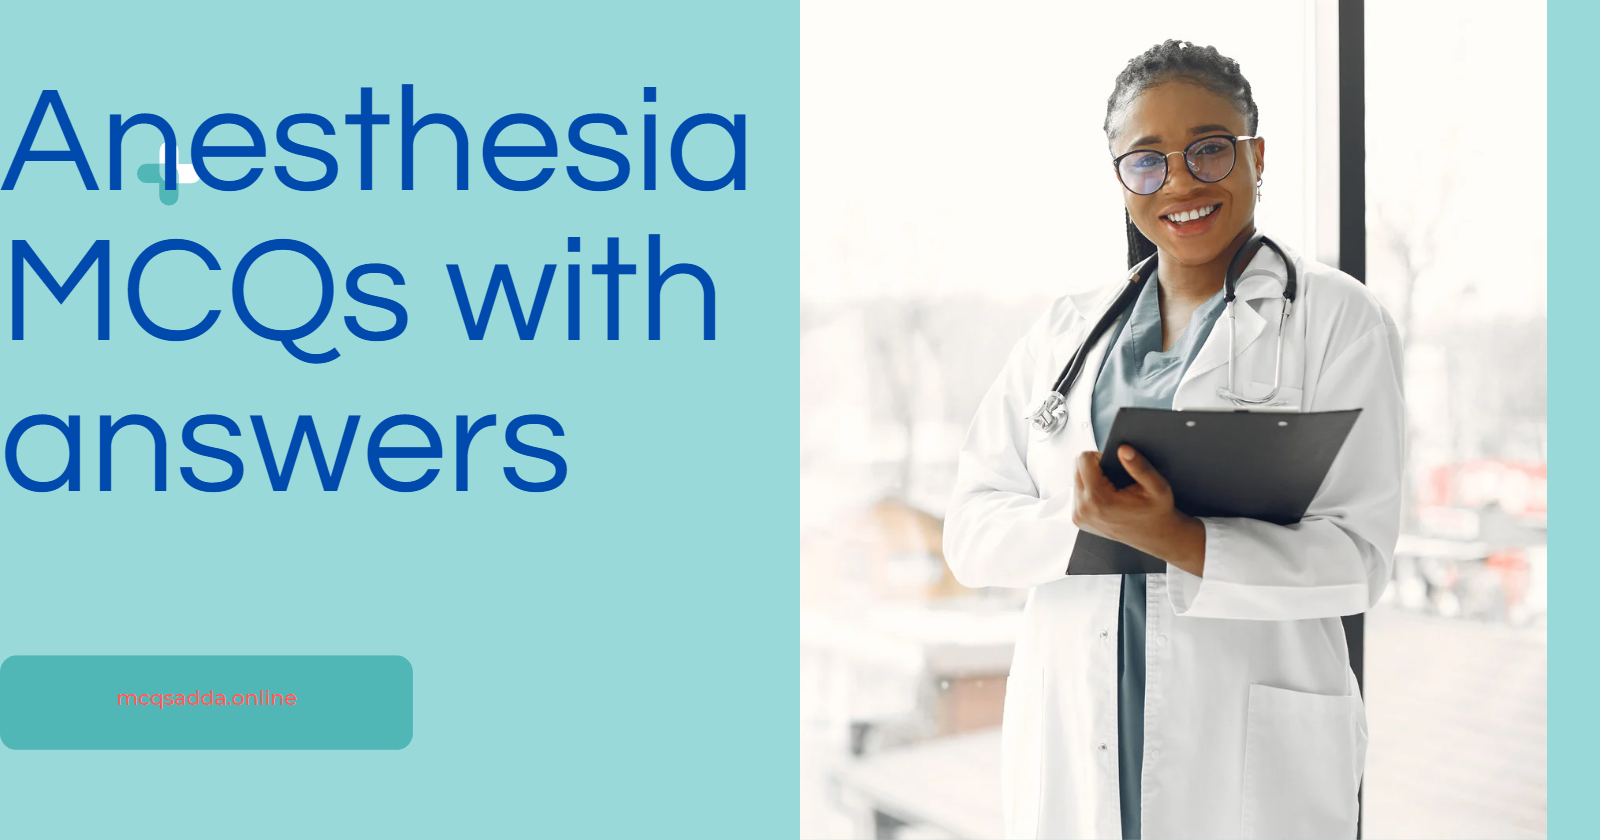 Anesthesia MCQs with answers